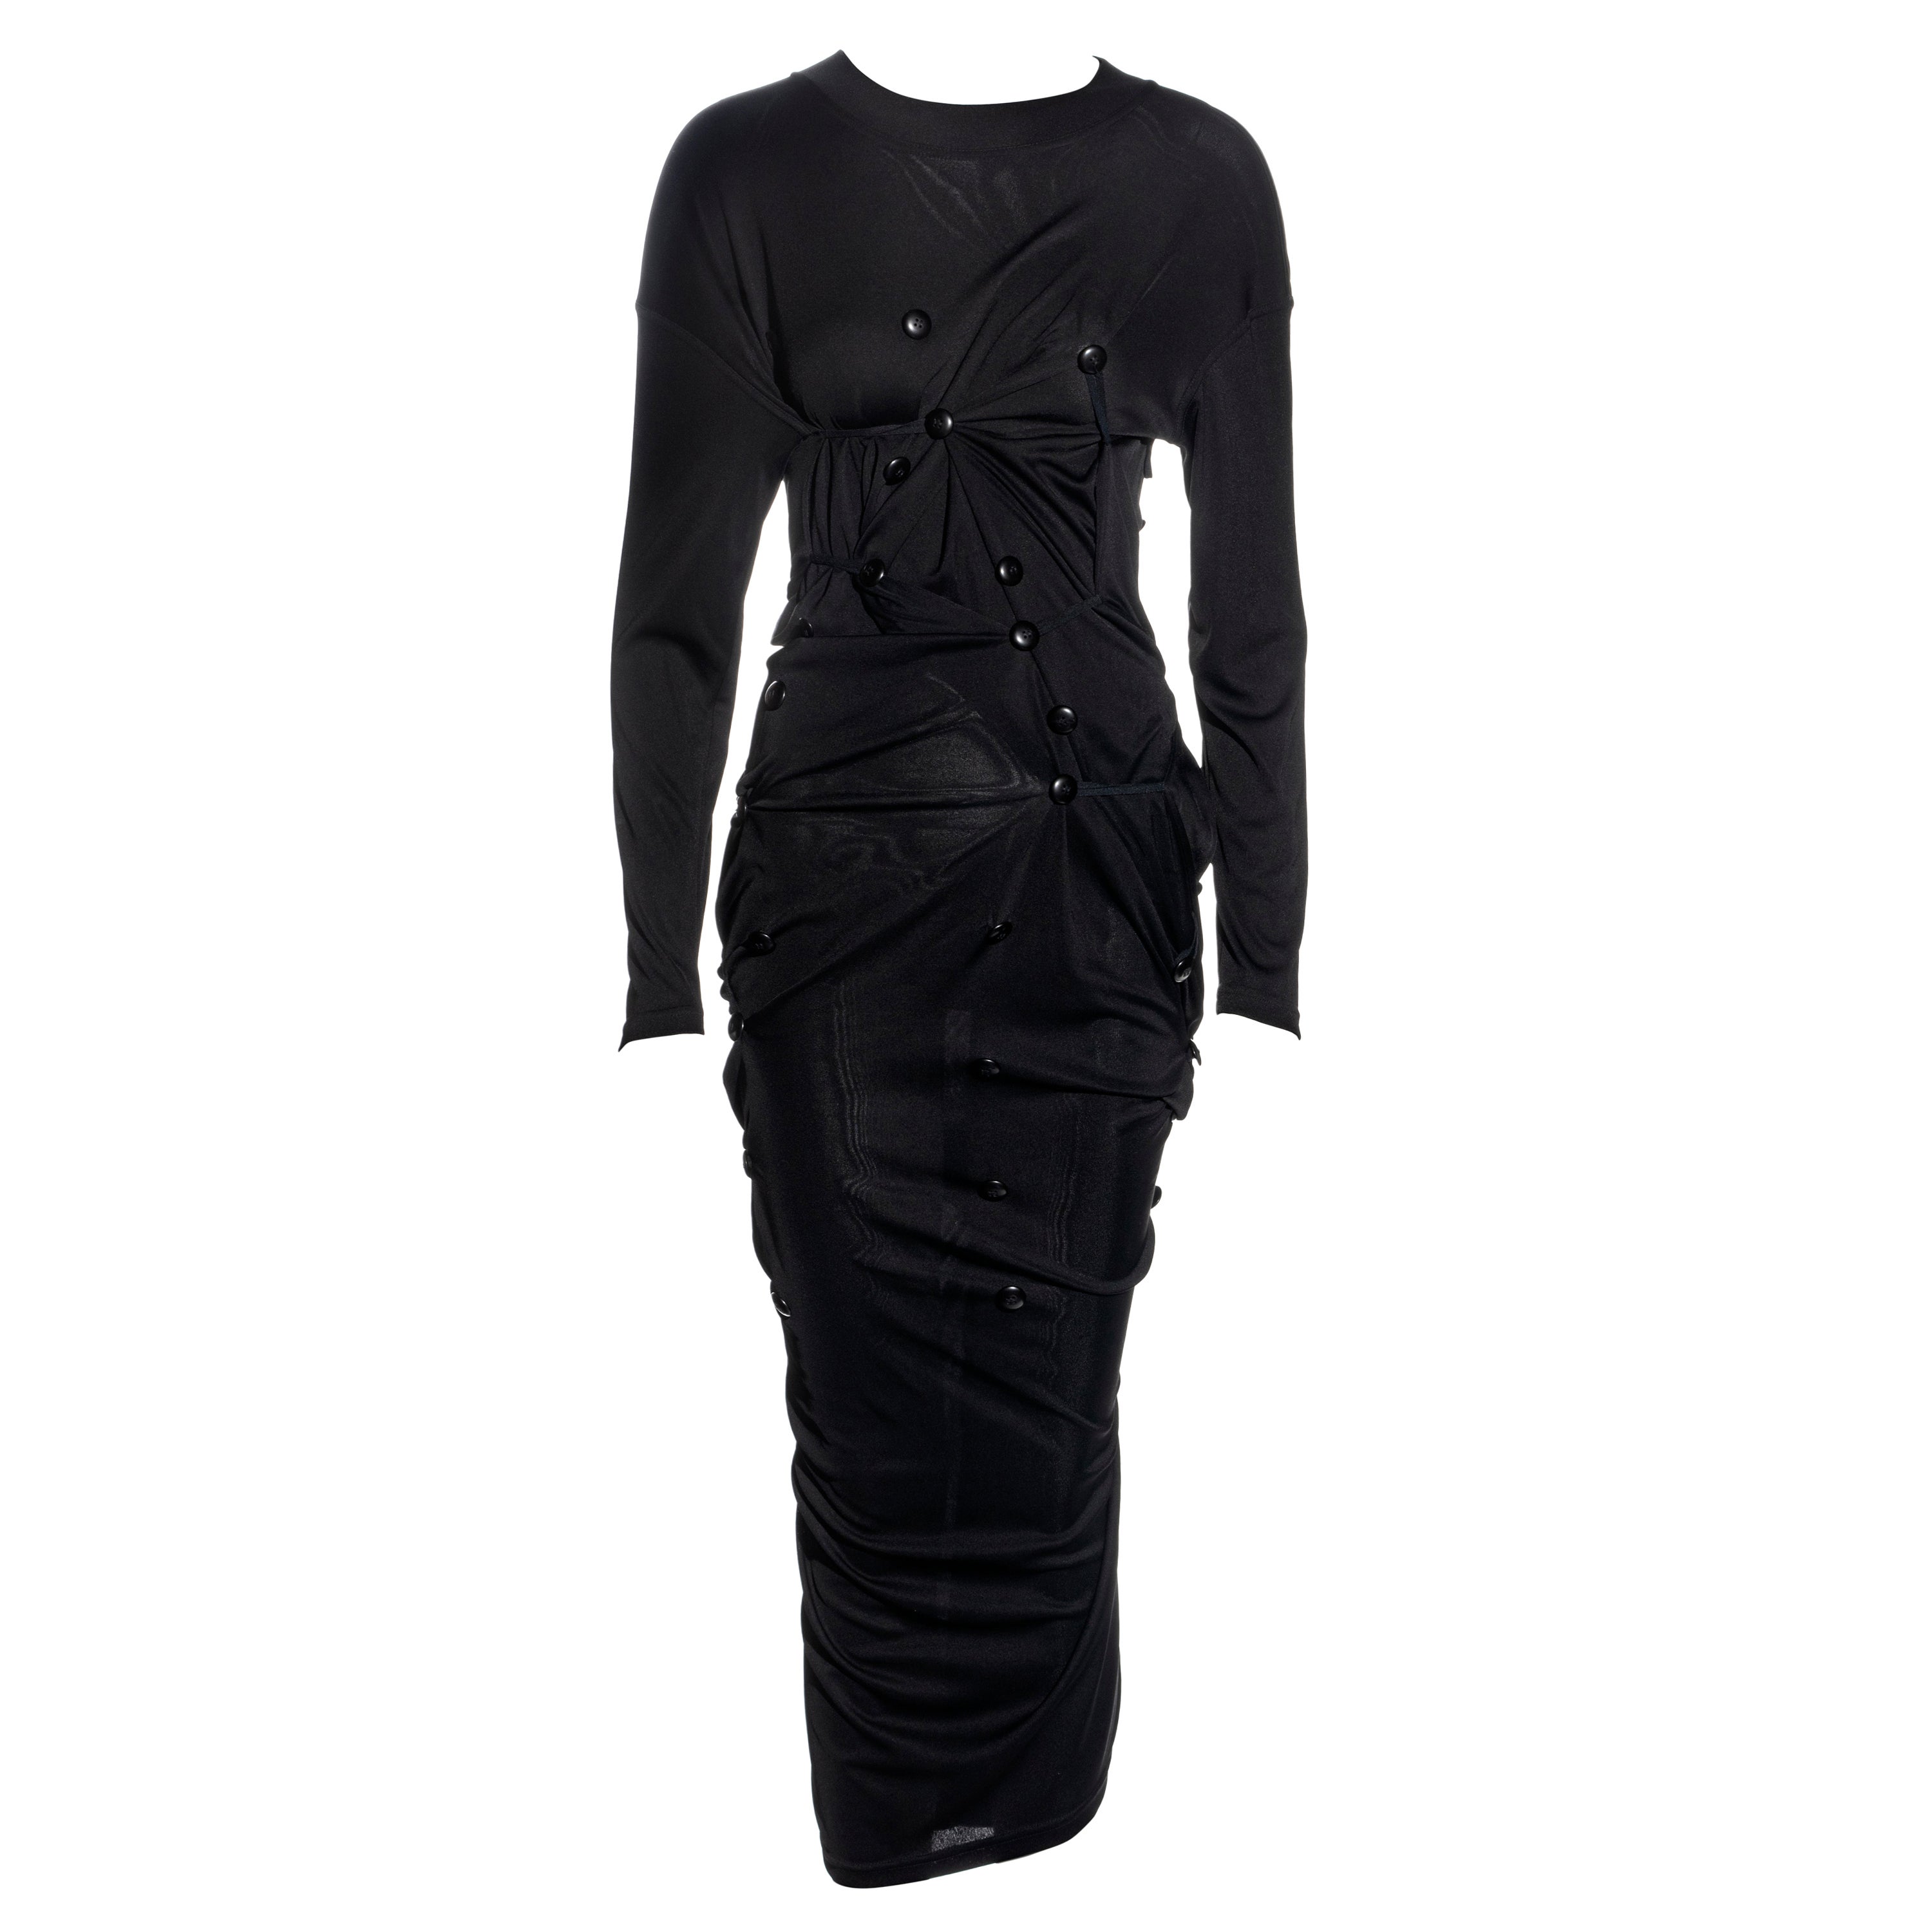 Dolce & Gabbana black jersey maxi dress with adjustable button closures, fw 1987 For Sale